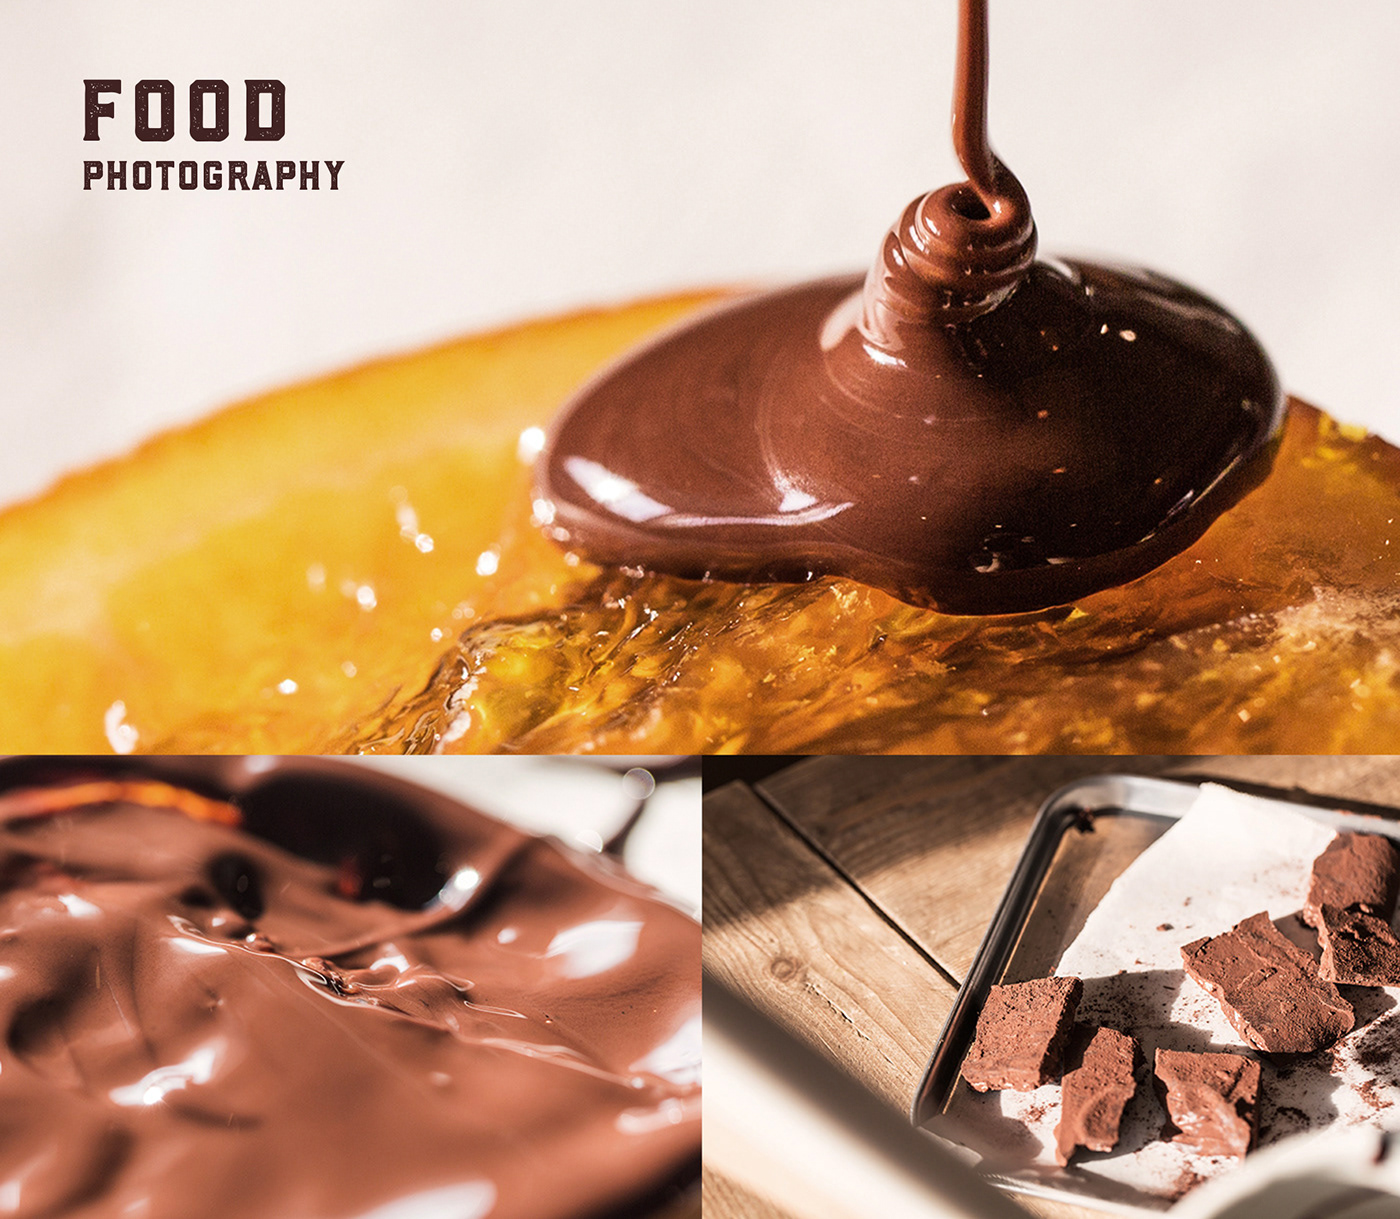 brand Classic Food  chocolate dessert package graphic delicious craft rebranding